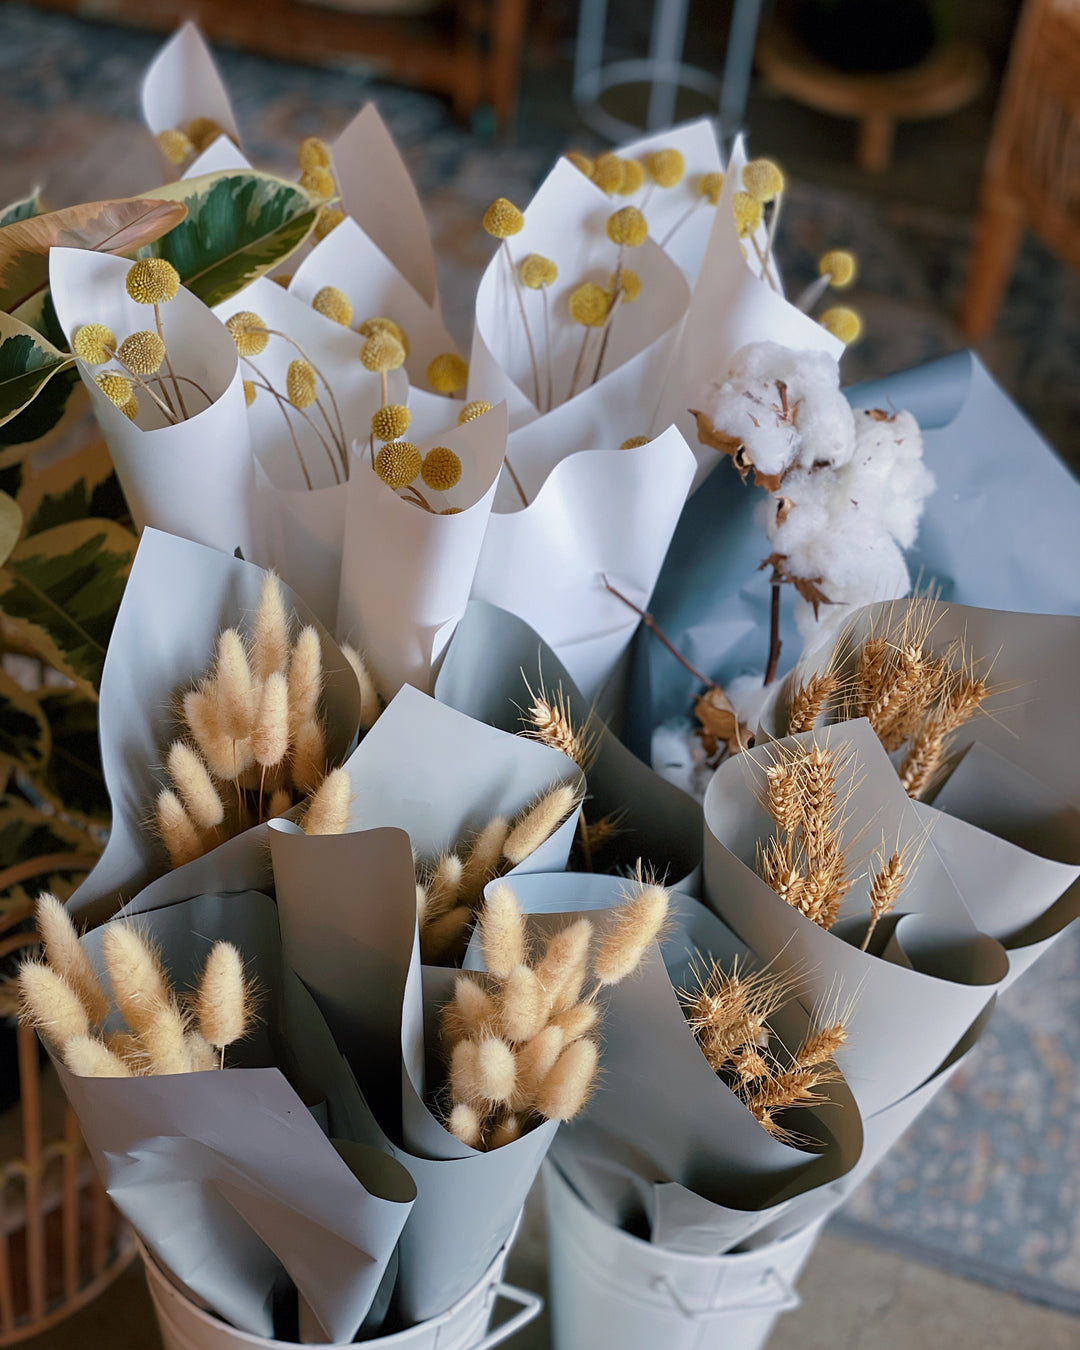 Dried Flower Store, Dried white flower, Cotton Flower, Florist near me, Flower delivery Daisy Hill, Florist springwood, springwood florist, beenleigh Florist, florist loganholme, mothers day flowers